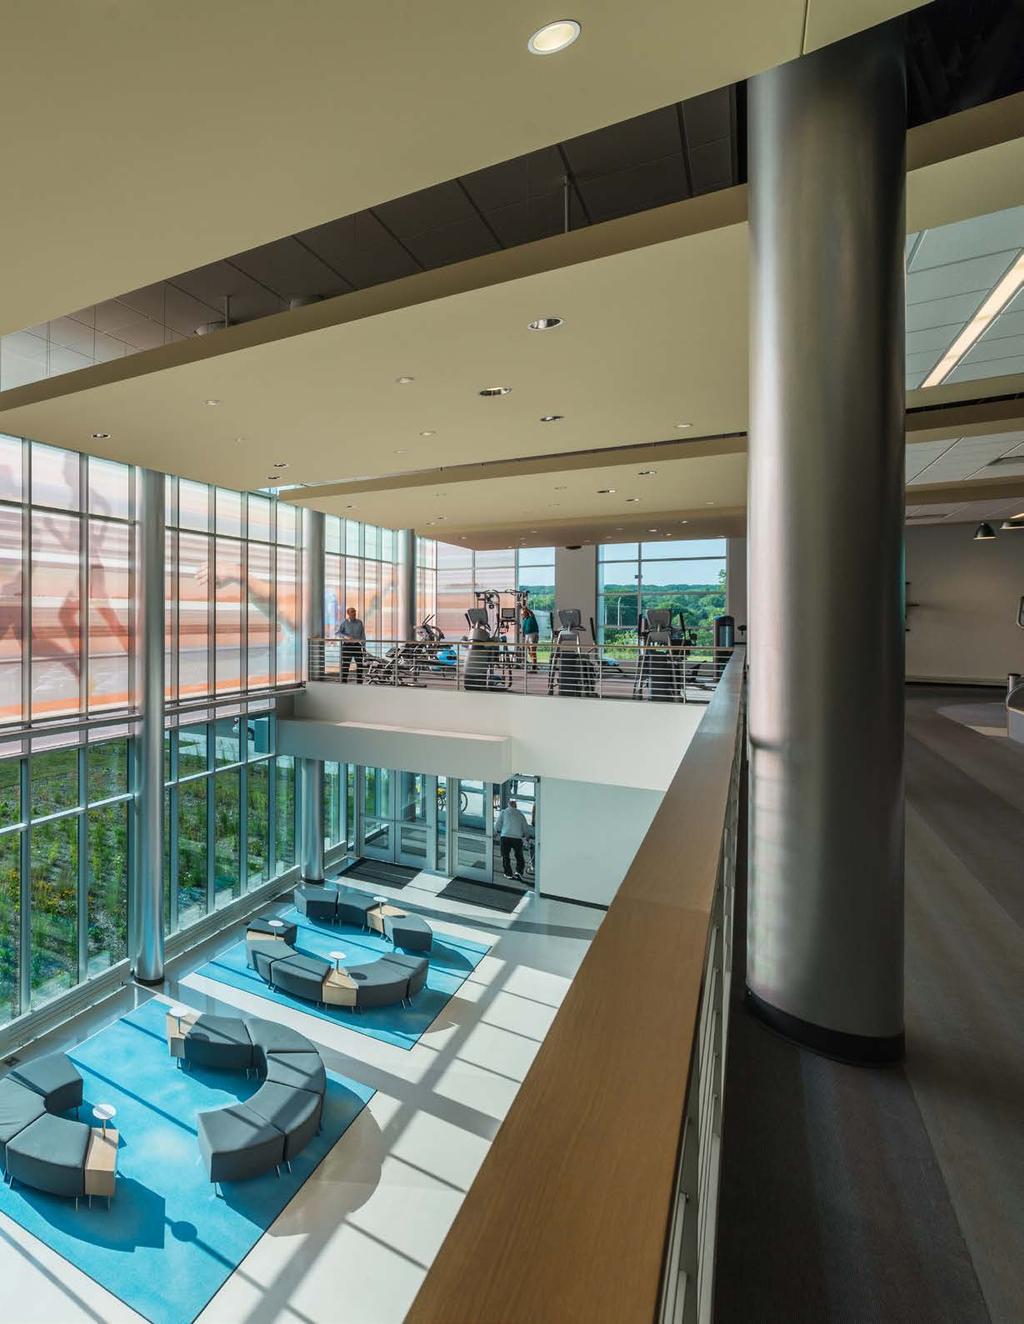 EDUCATION COLLEGE AND UNIVERSITY Whether in a lecture hall, student center, library, or sports complex, carpet can inspire in the learning environment while helping recruit some of the best